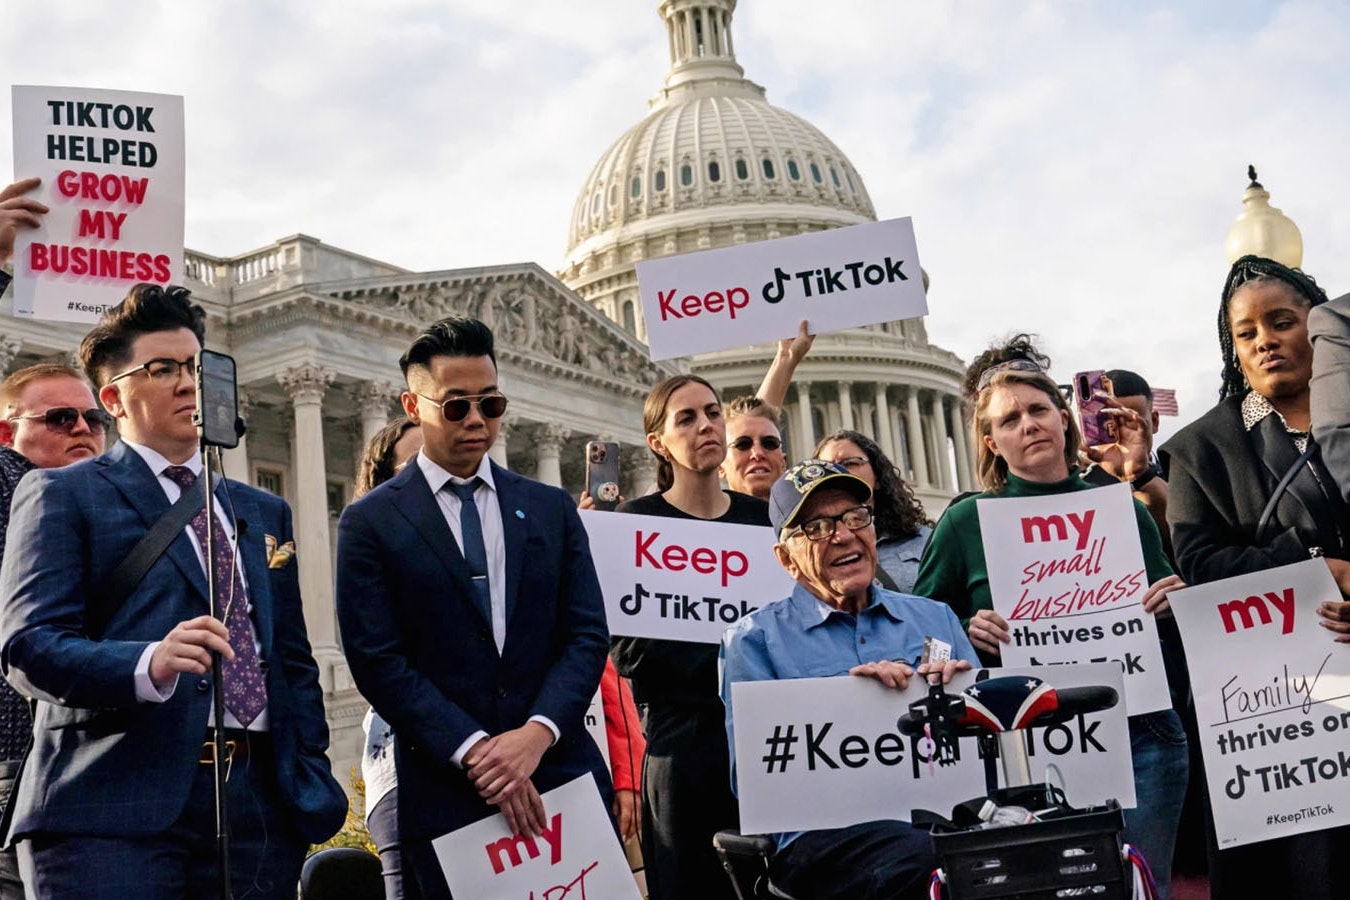 Supporters of the popular social media app TikTok rally in Washington, D.C., ahead of Wednesday's move to ban the platform if its Chinese ownership doesn't sell it.